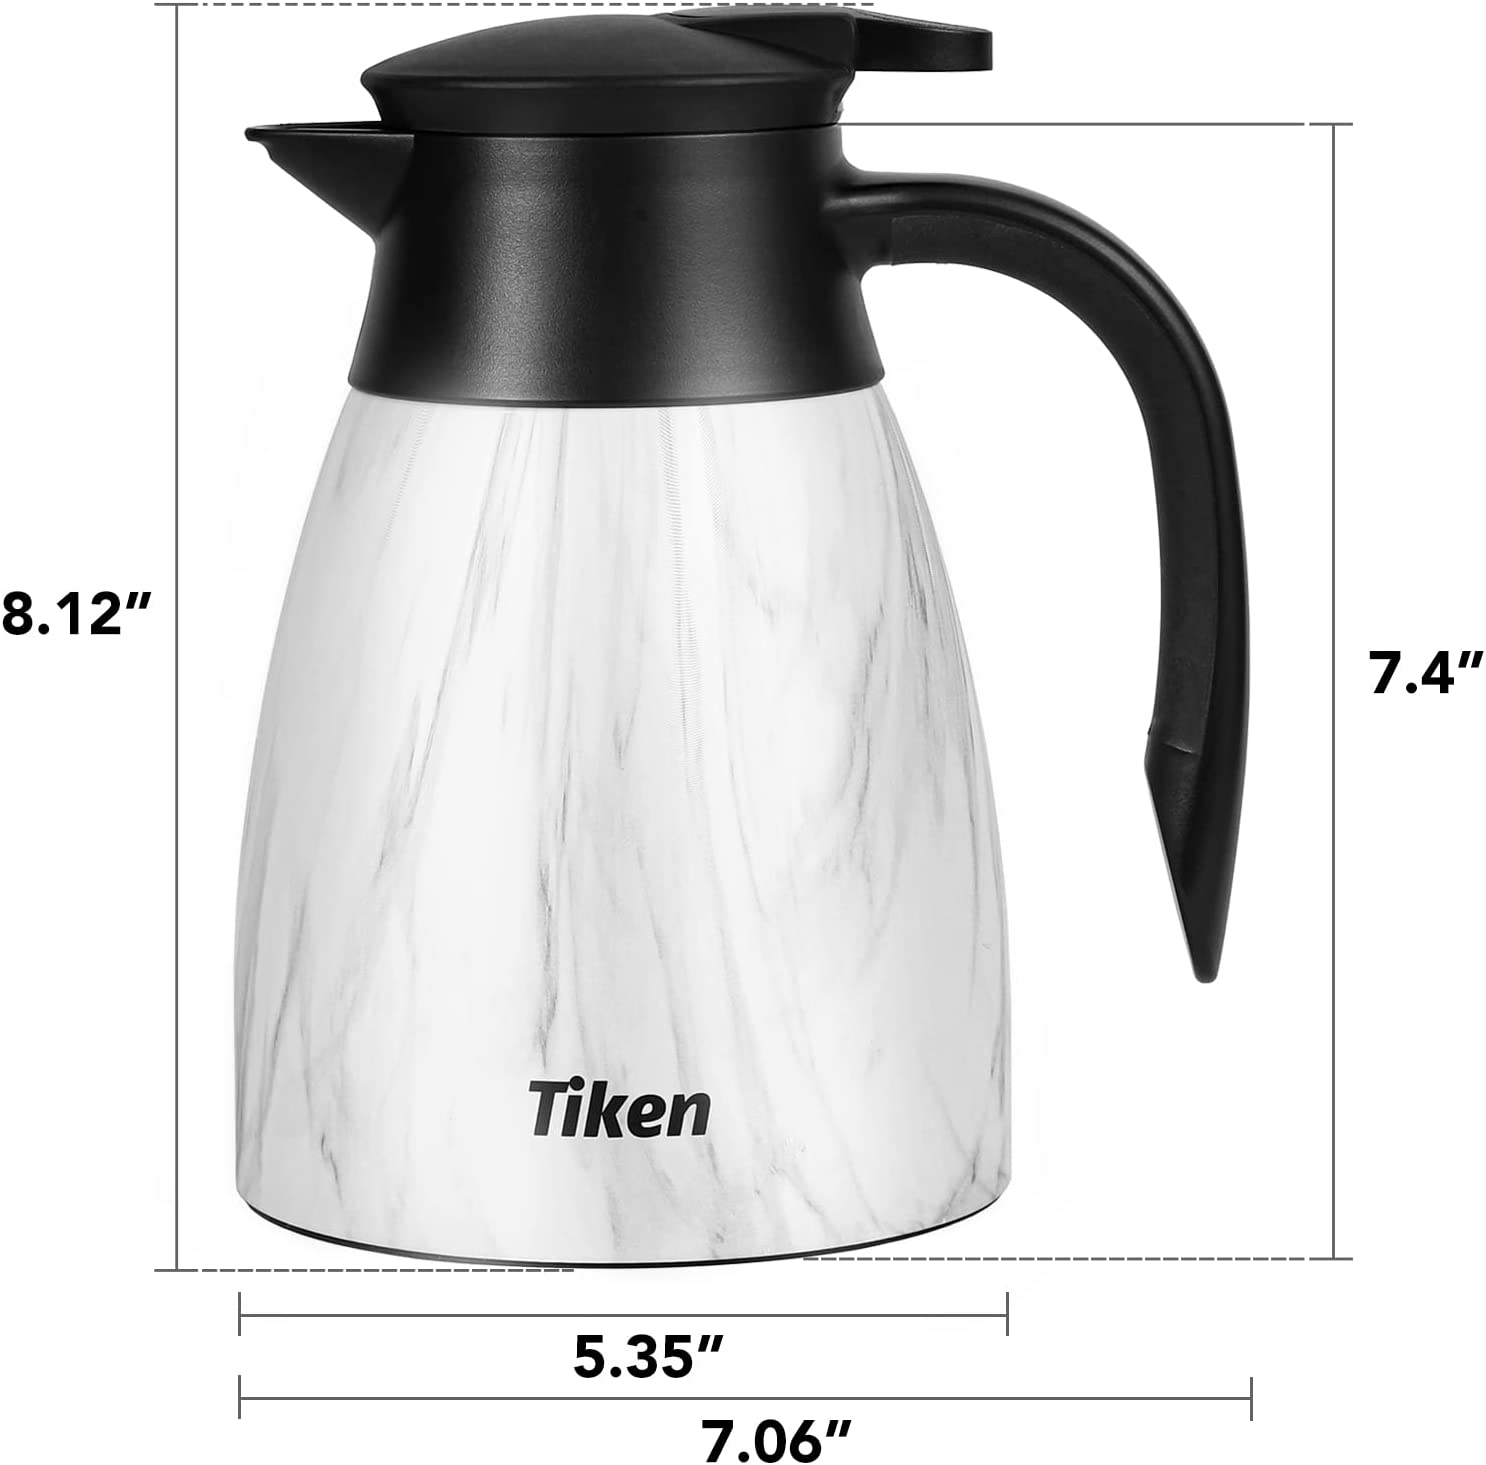 Choice 34 oz. Stainless Steel Insulated Carafe / Server